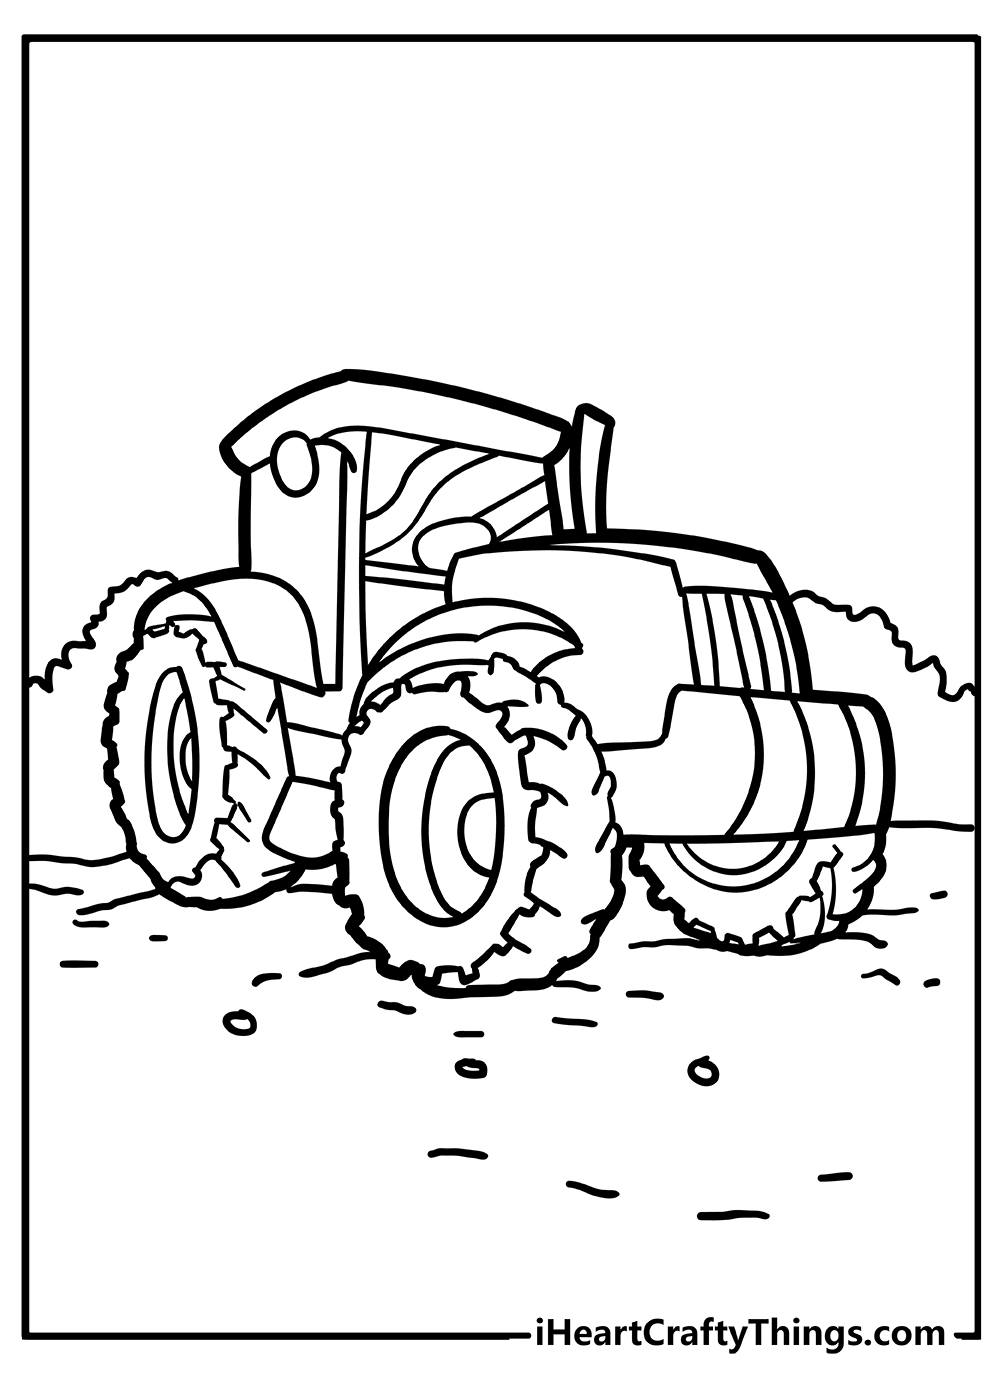 Tractor Coloring Sheet for children free download